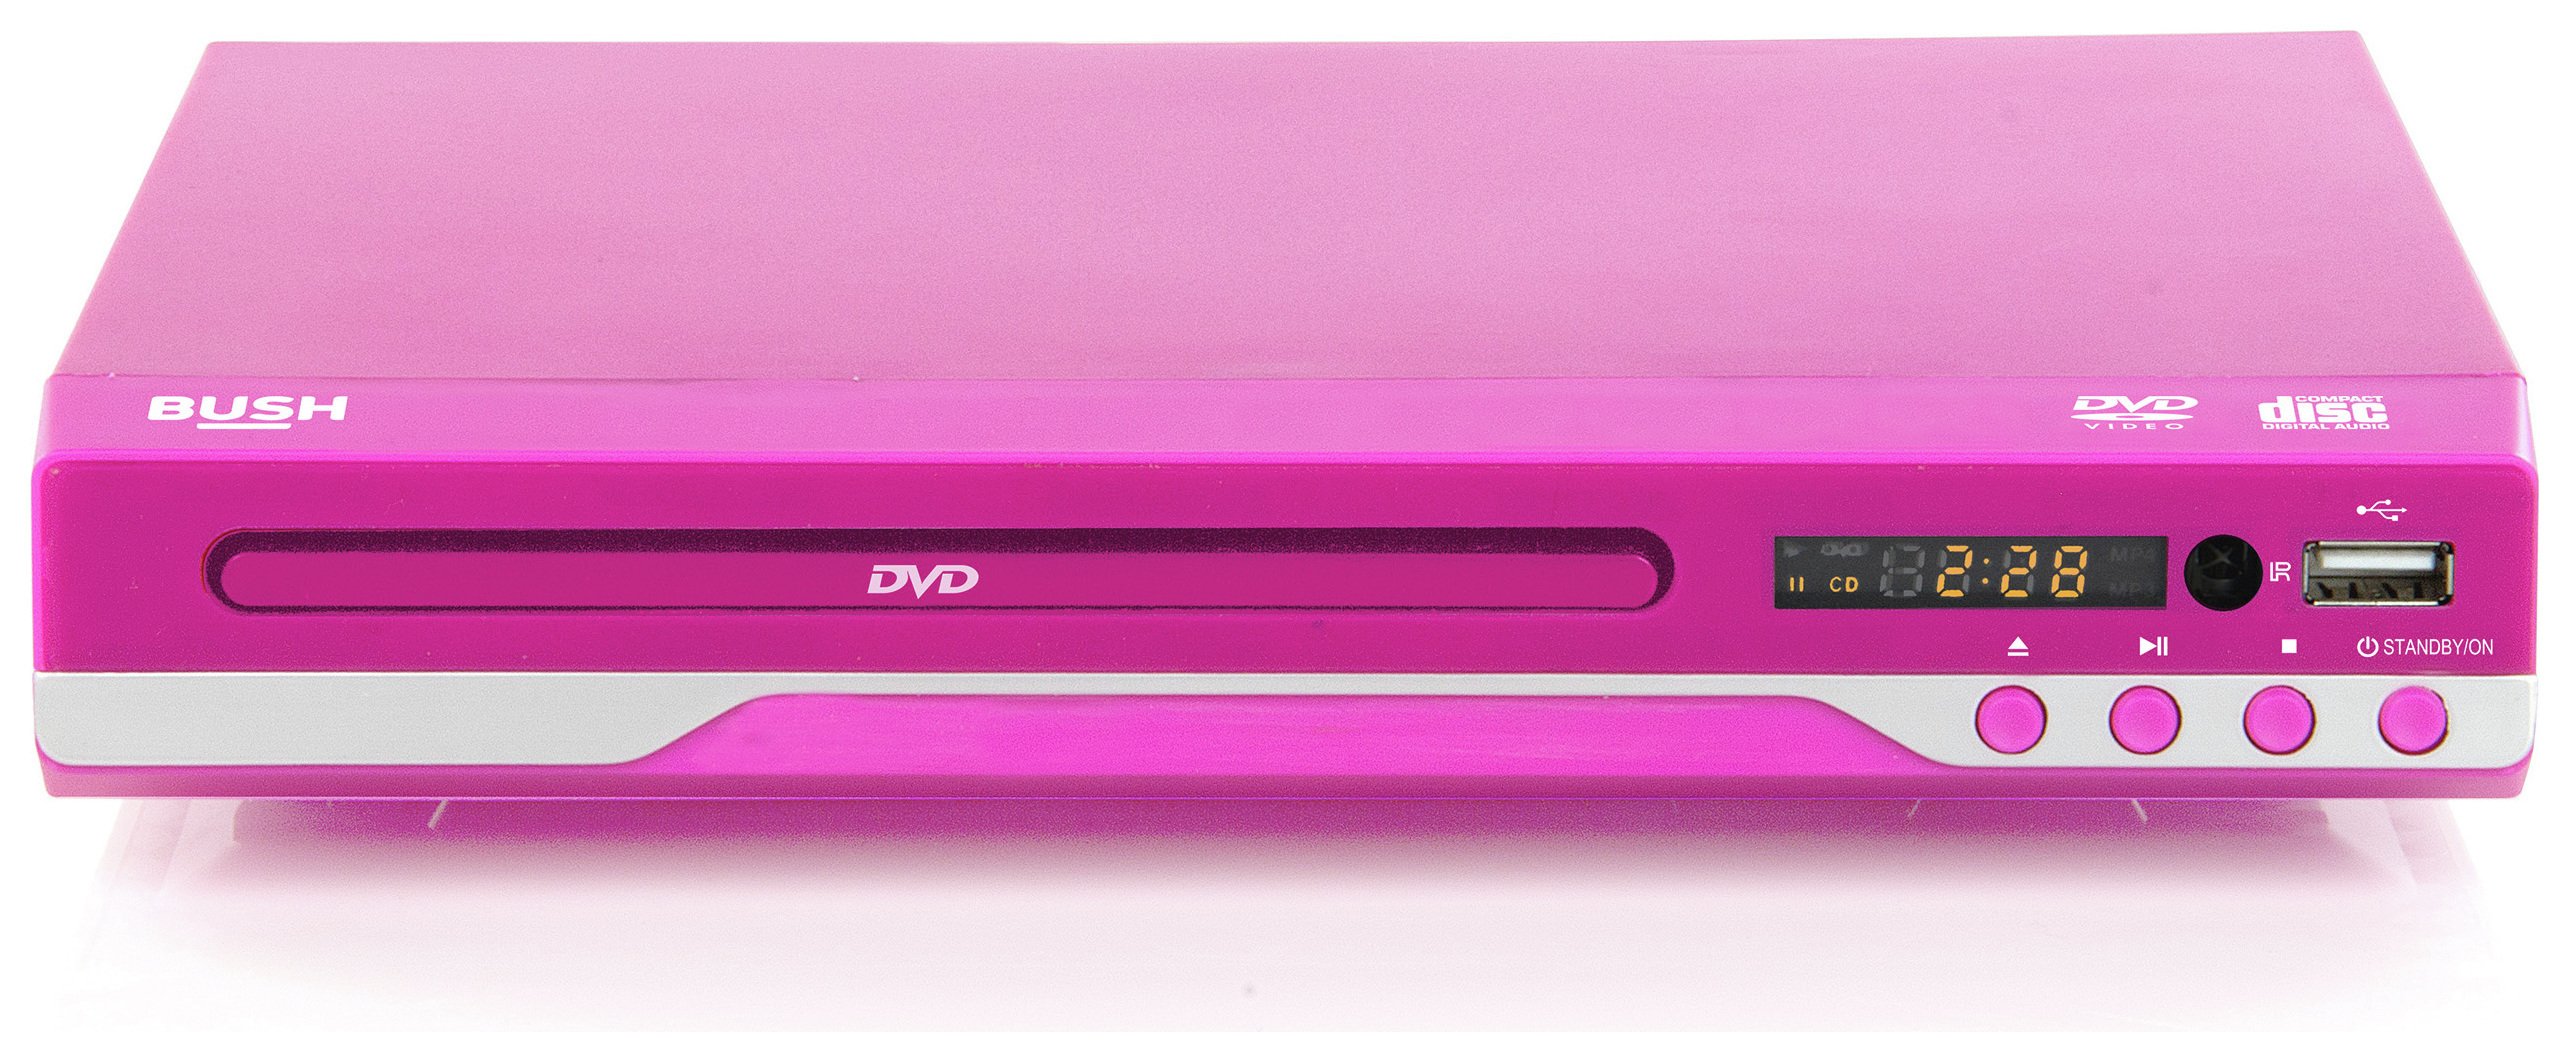 Bush Pink Dvd Player With Display And Usb Review Review Electronics